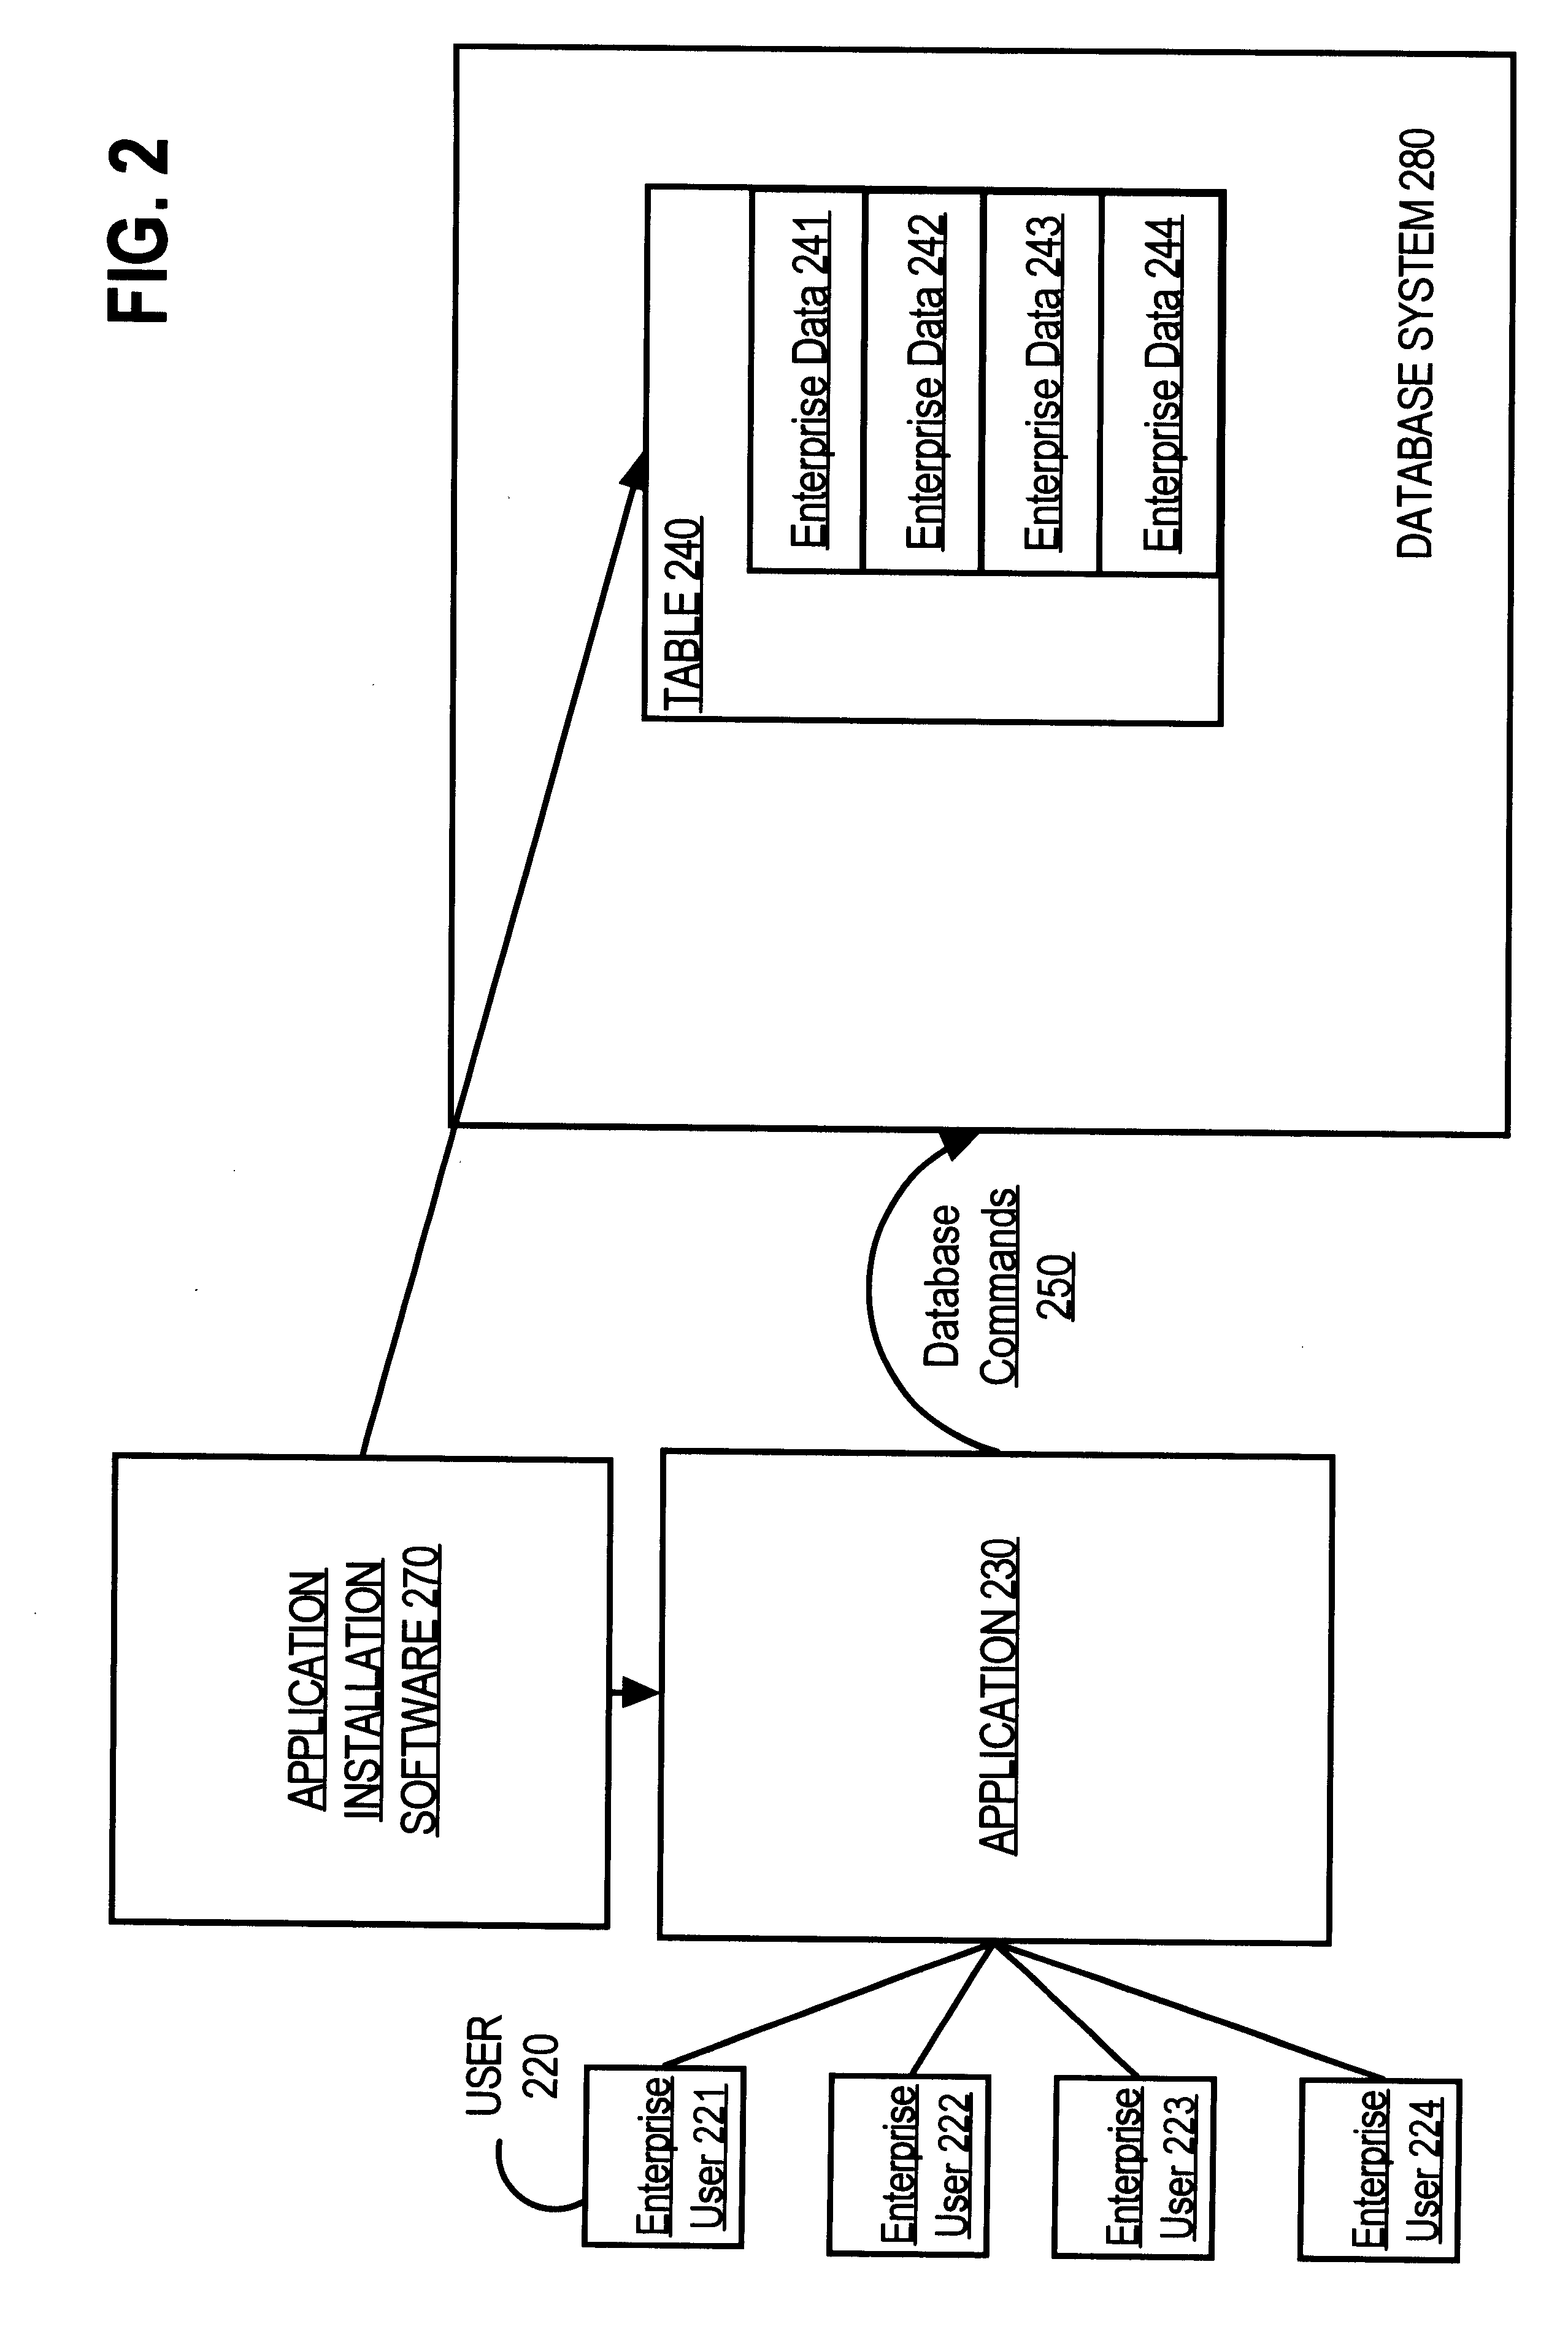 Virtually partitioning user data in a database system